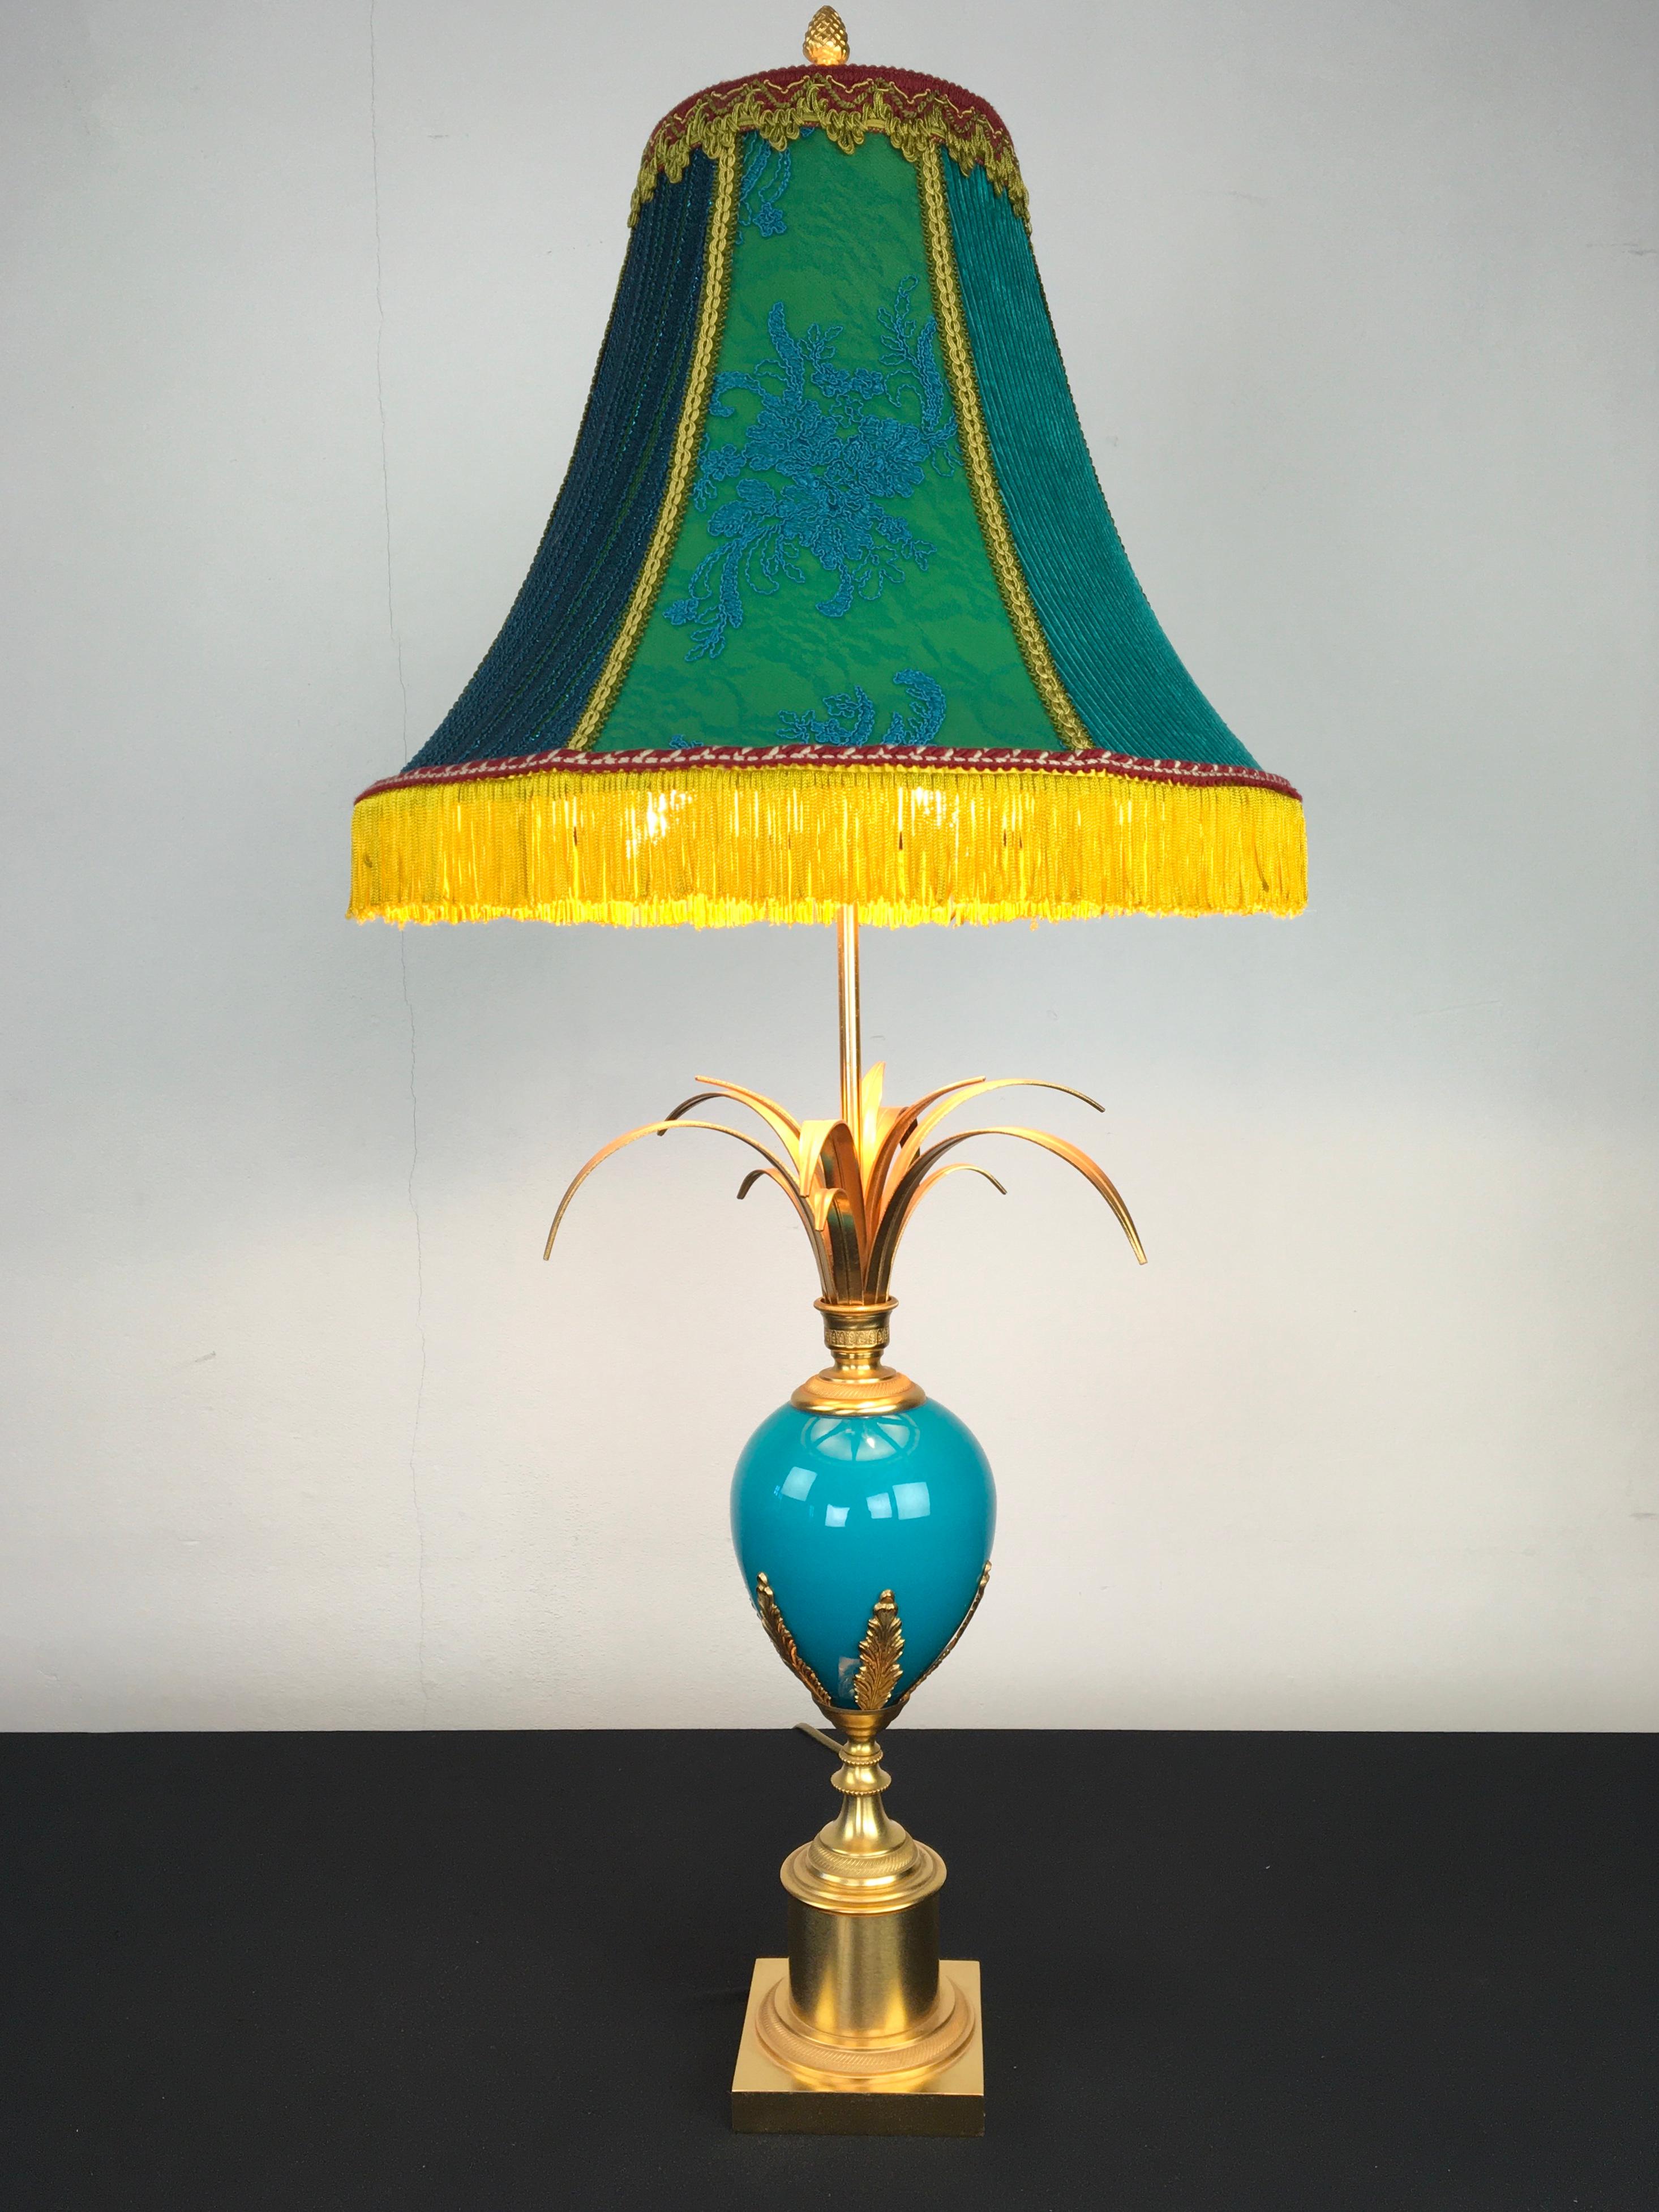 Great looking blue turquoise ostrich egg table lamp by S.A. Boulanger. 
A table lamp with a blue opaline ostrich egg and palm leaves on top. 
The base is made of brass with moulded brass leaves on the opal egg and with a pine cone finish on top.